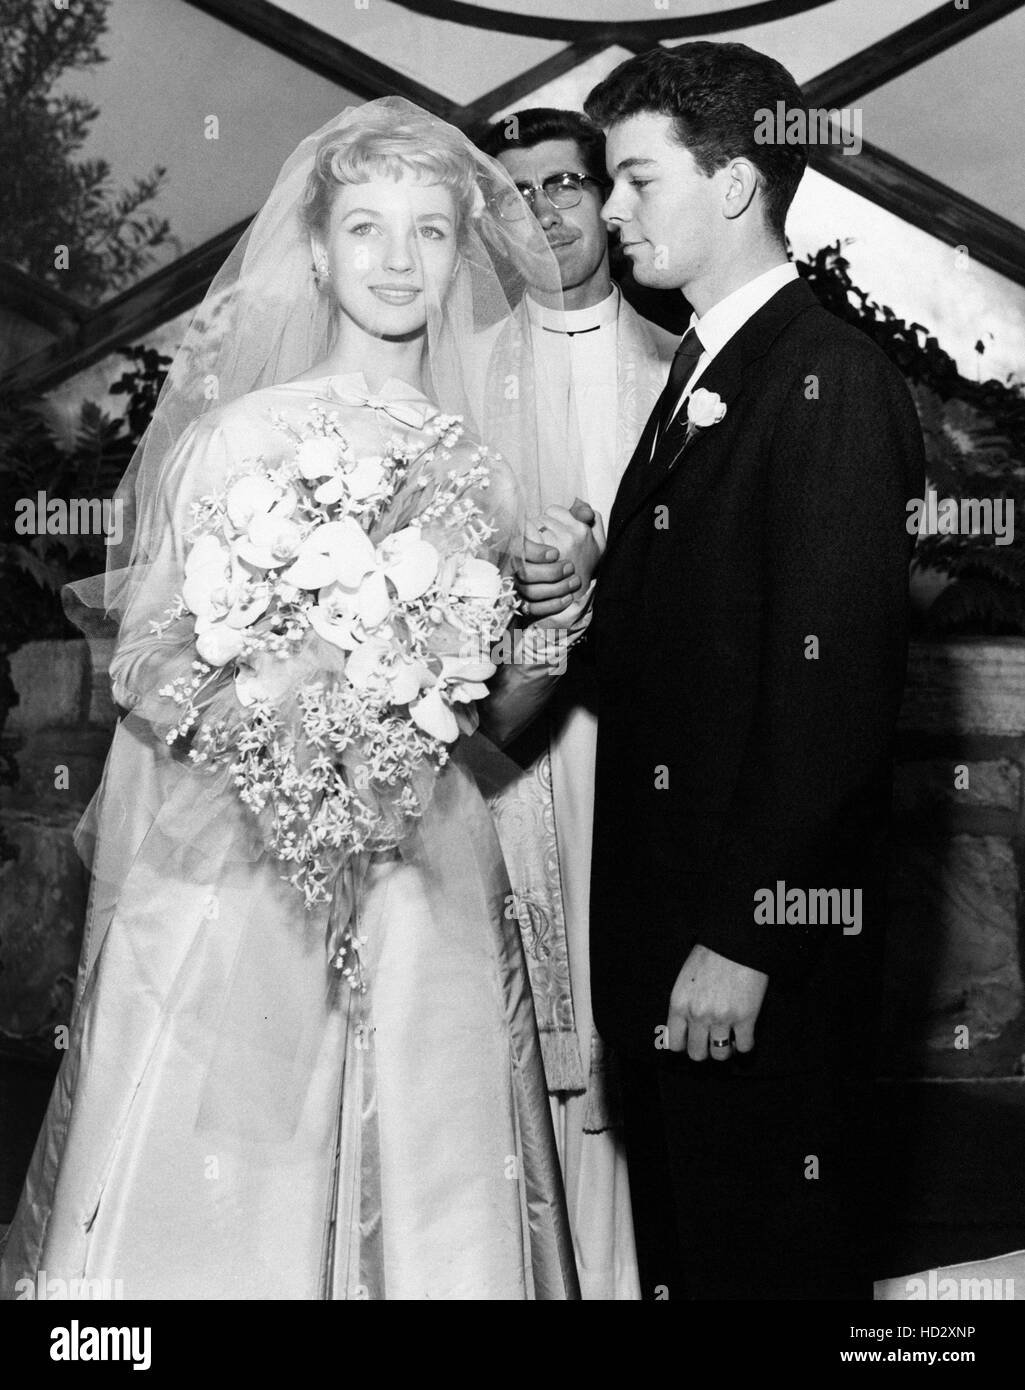 Wedding of Russ Tamblyn, right, and his first wife, actress Venetia Stevenson, February 14, 1956 Stock Photo